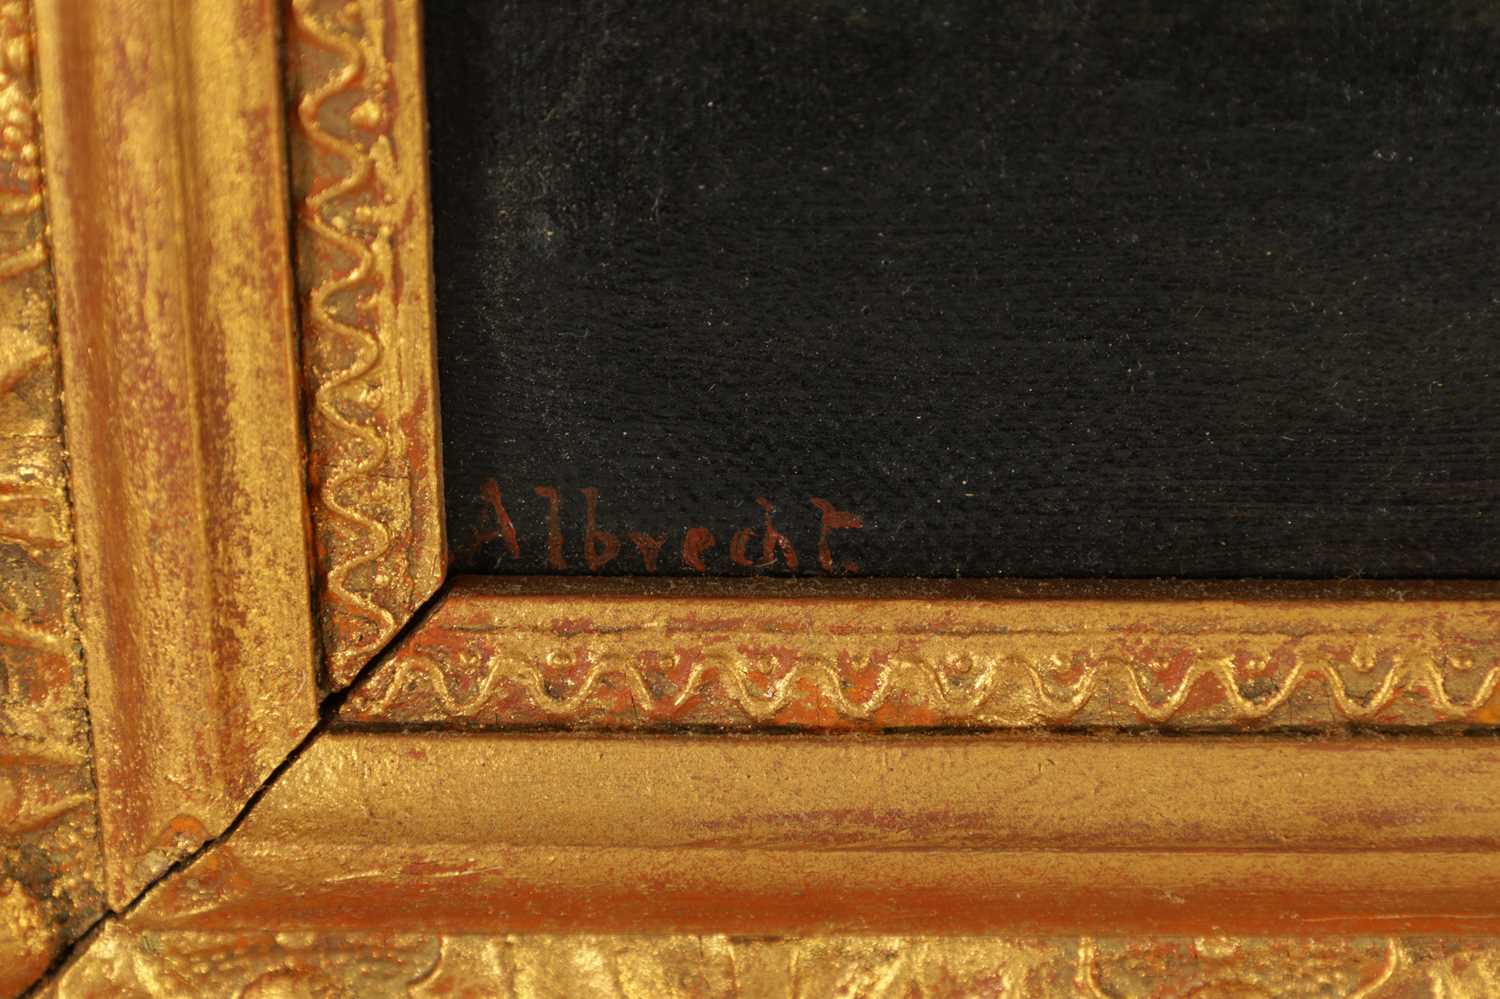 M. ALBRECHT. A 19TH CENTURY OIL ON CANVAS. - Image 3 of 5